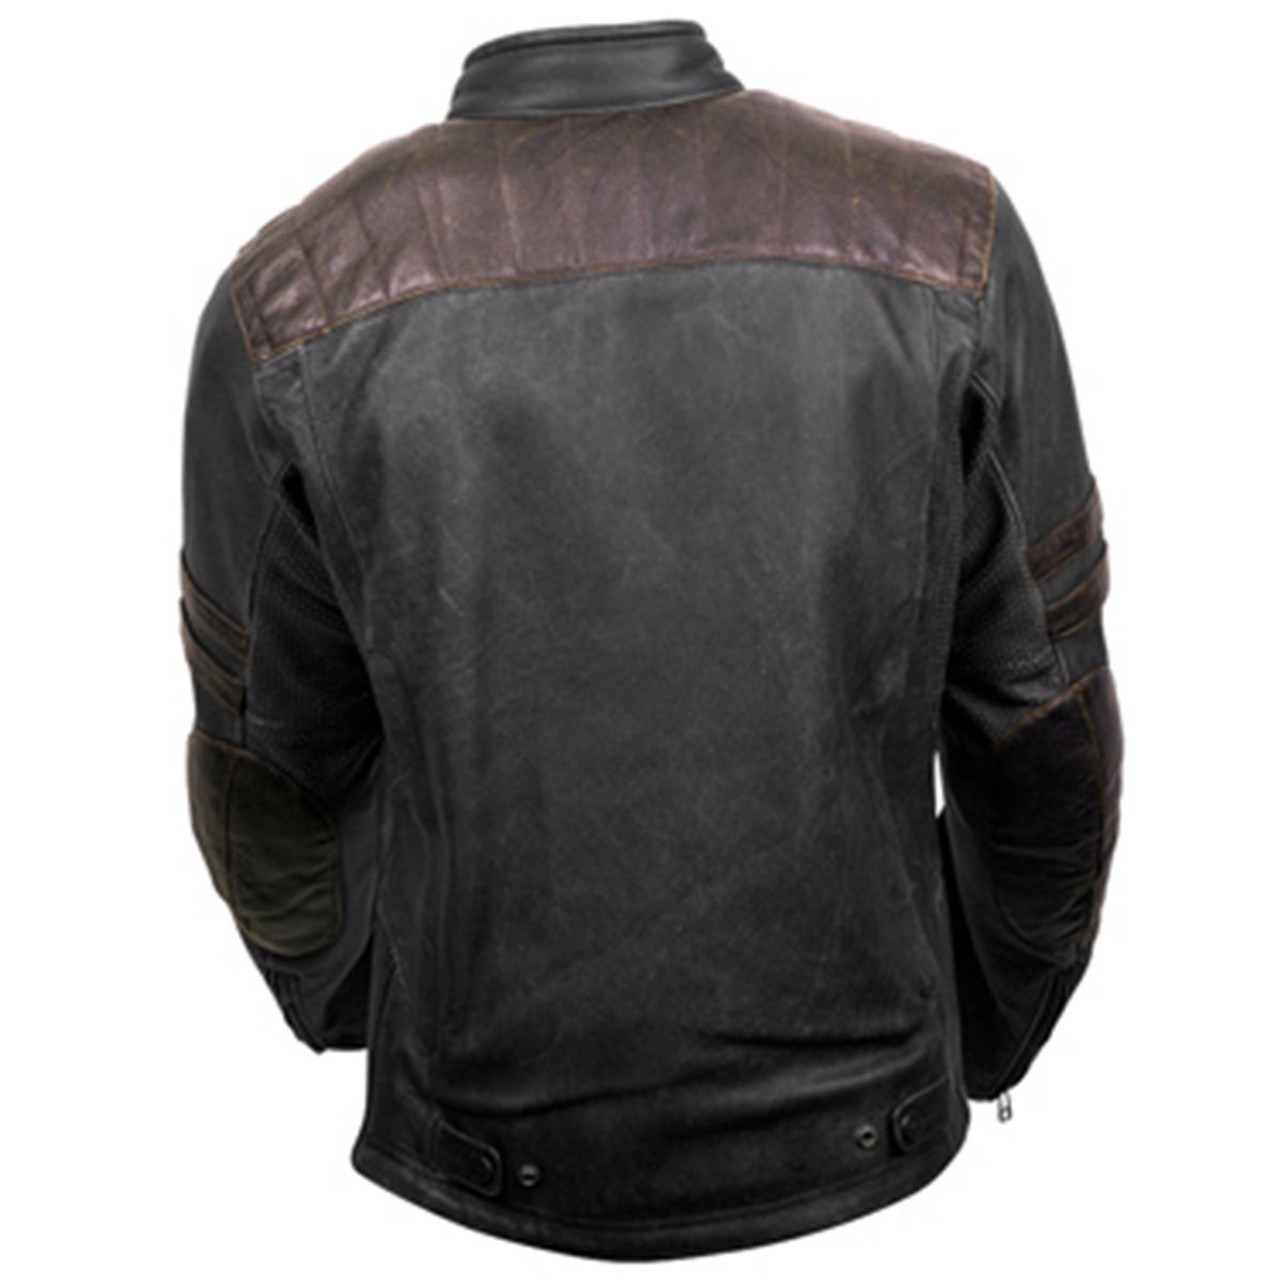 Scorpion 1909 Vintage Leather Motorcycle Jacket - Get Lowered Cycles